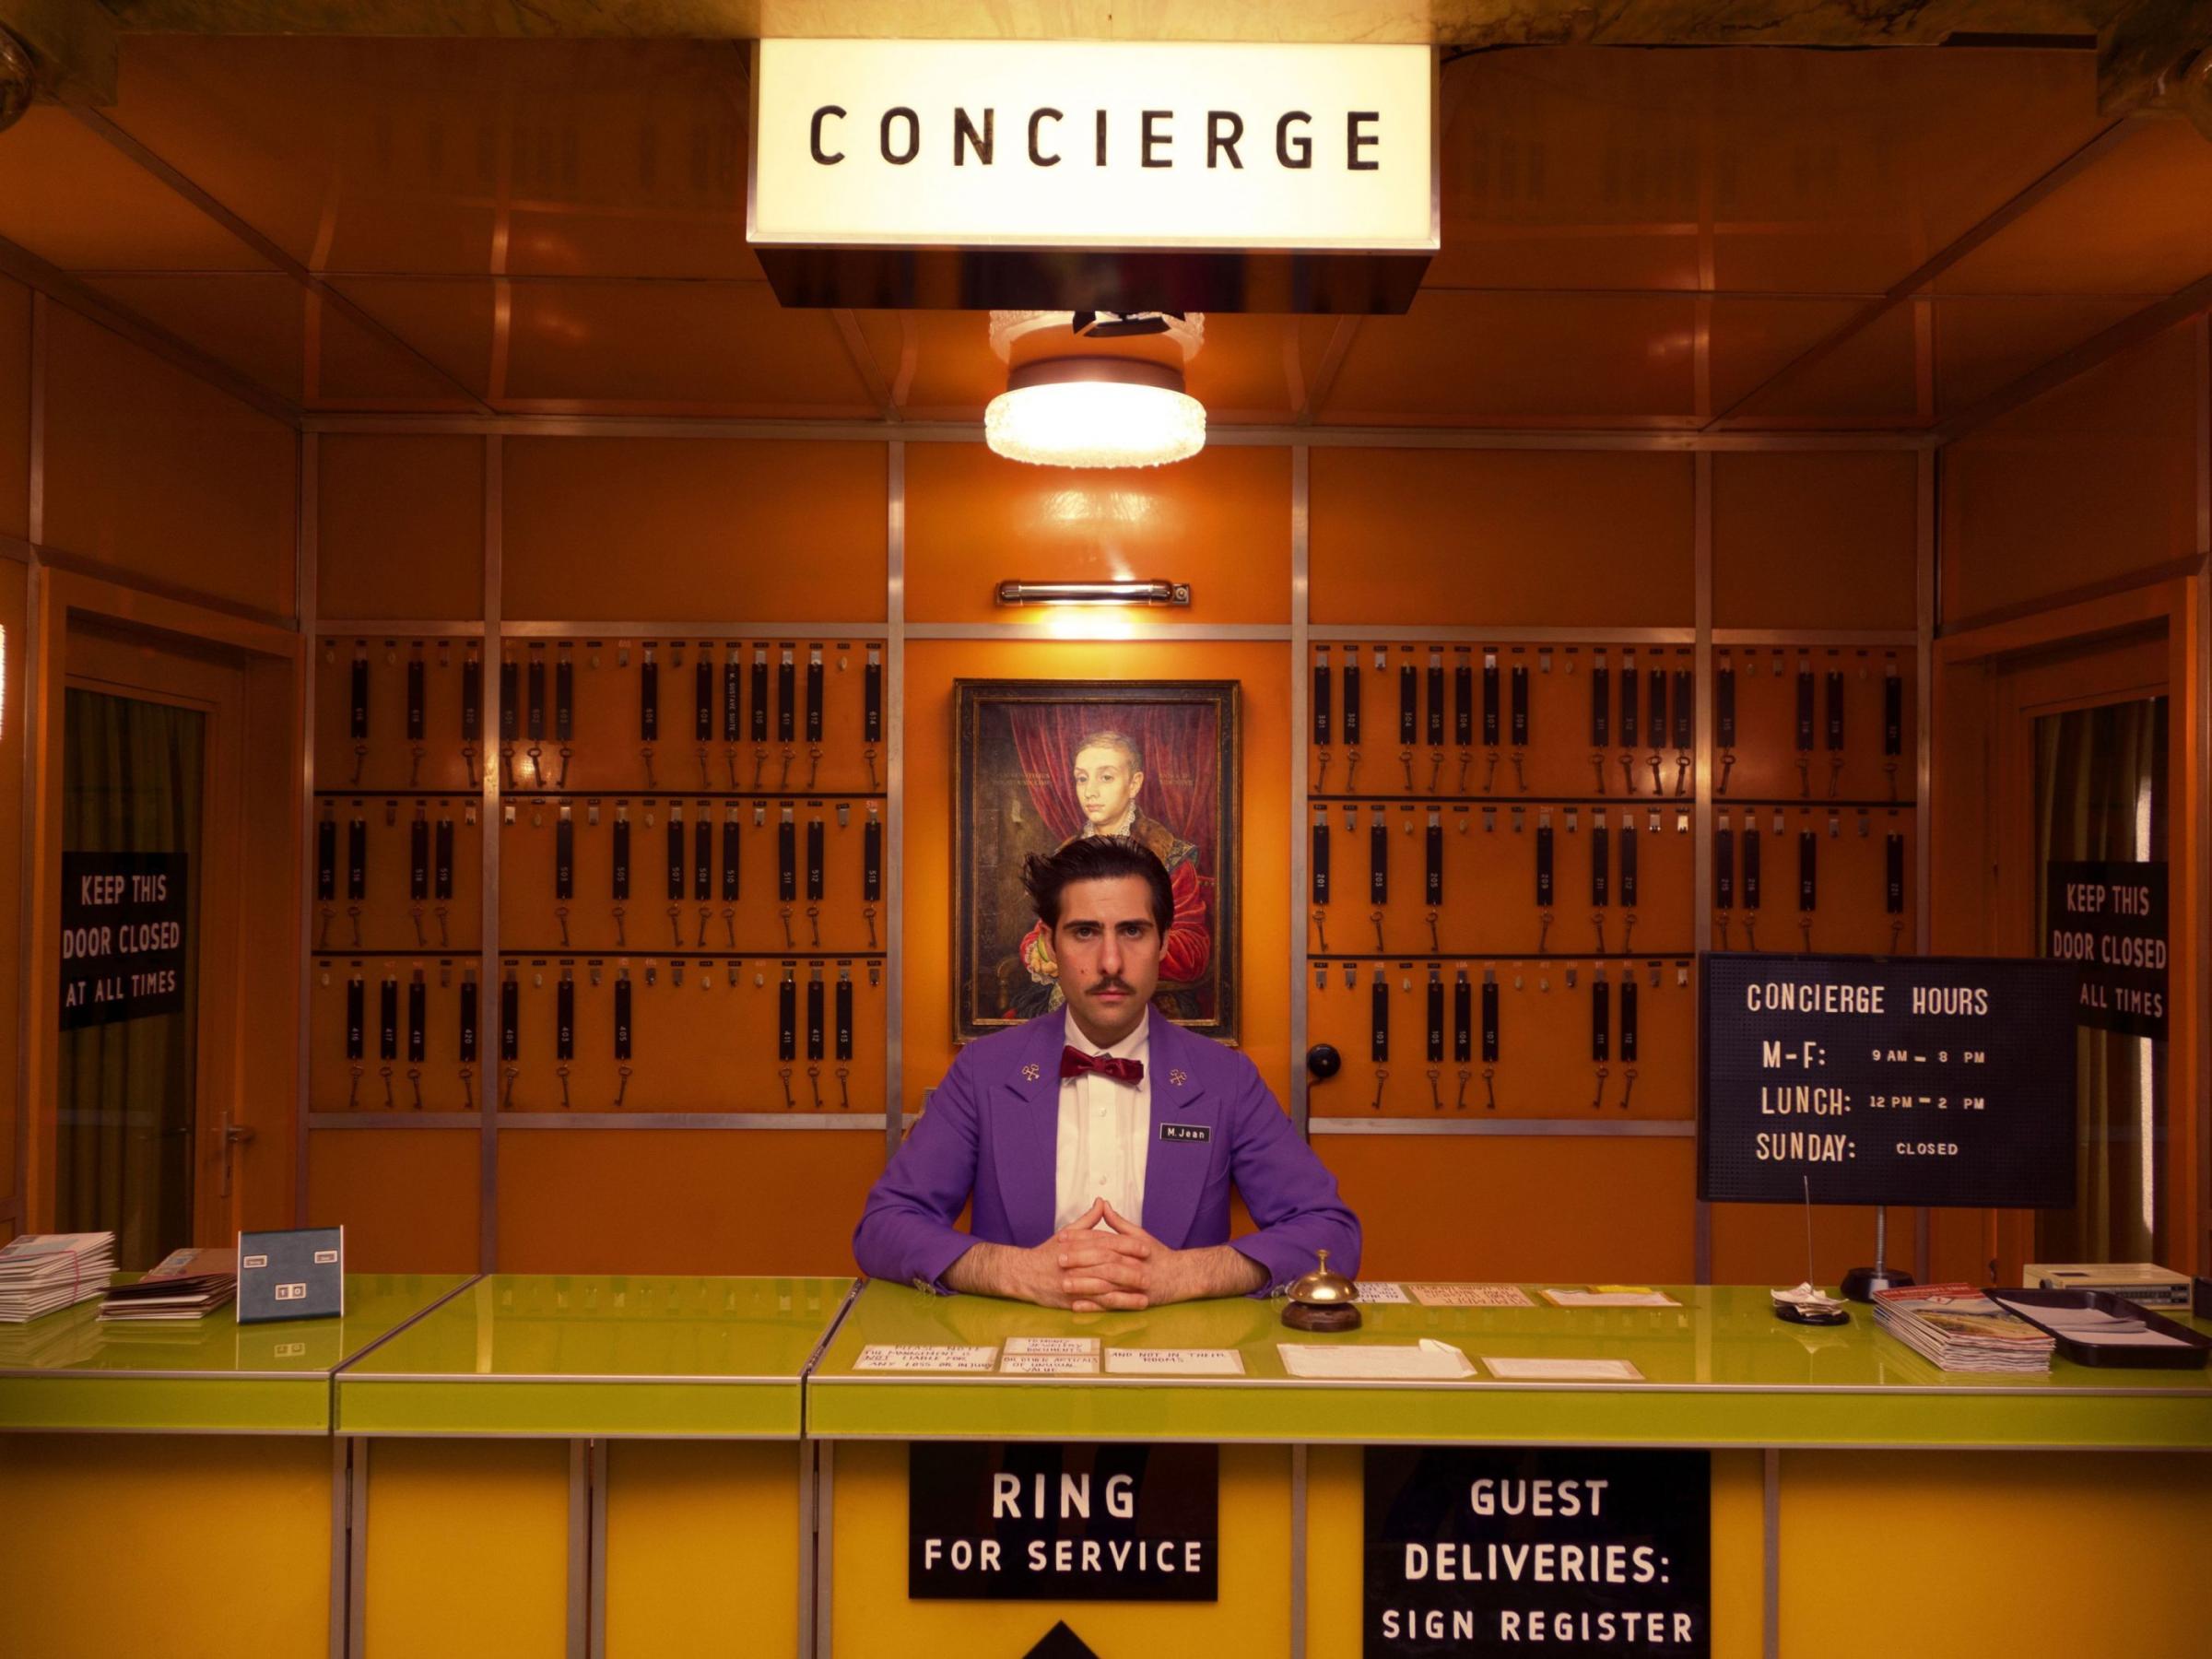 Boy With Apple painting residing behind the Concierge desk in the 1960s version of the Grand Budapest Hotel art in film